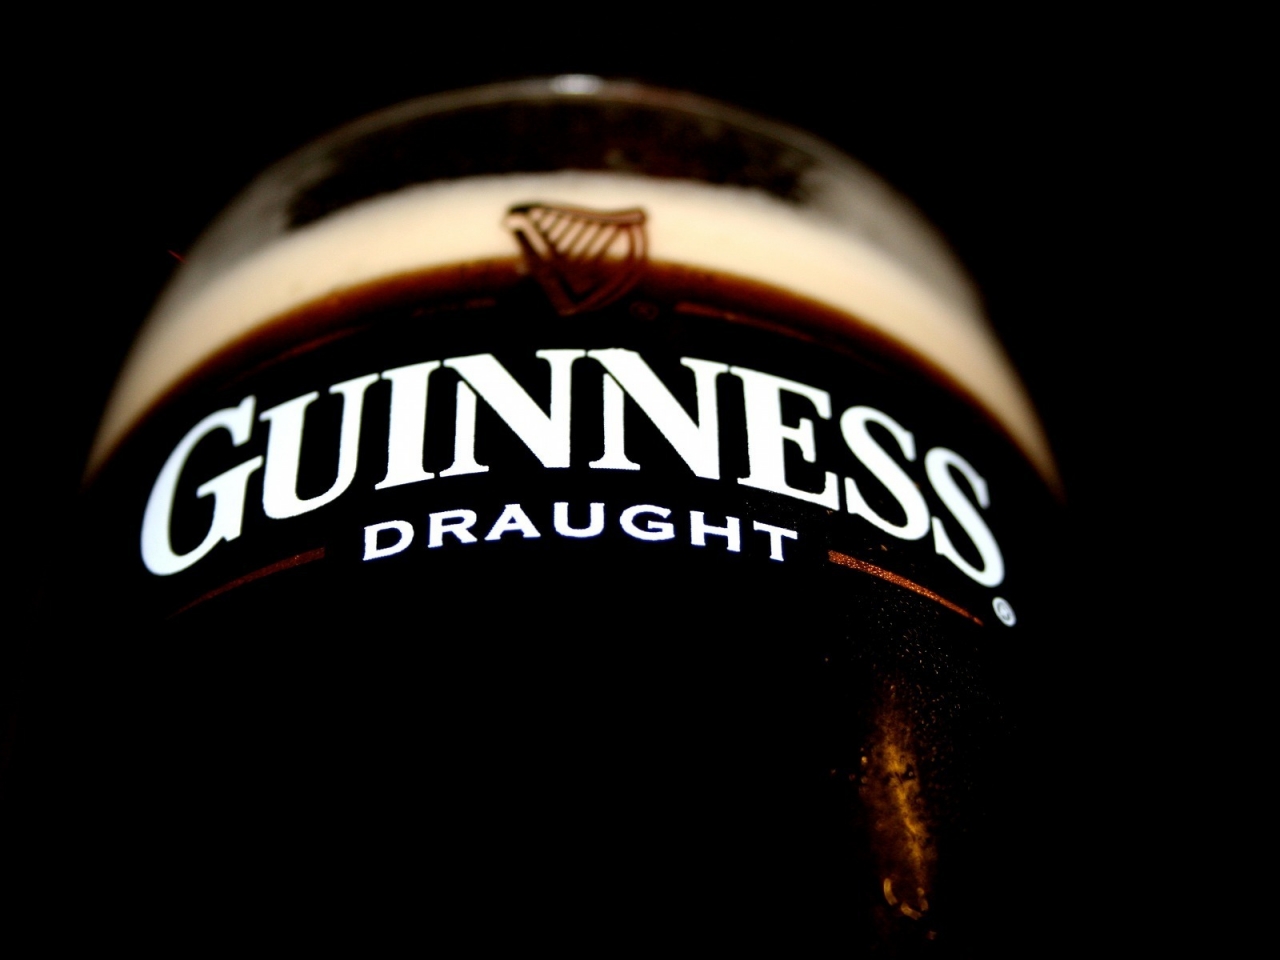 Guiness Beer for 1280 x 960 resolution